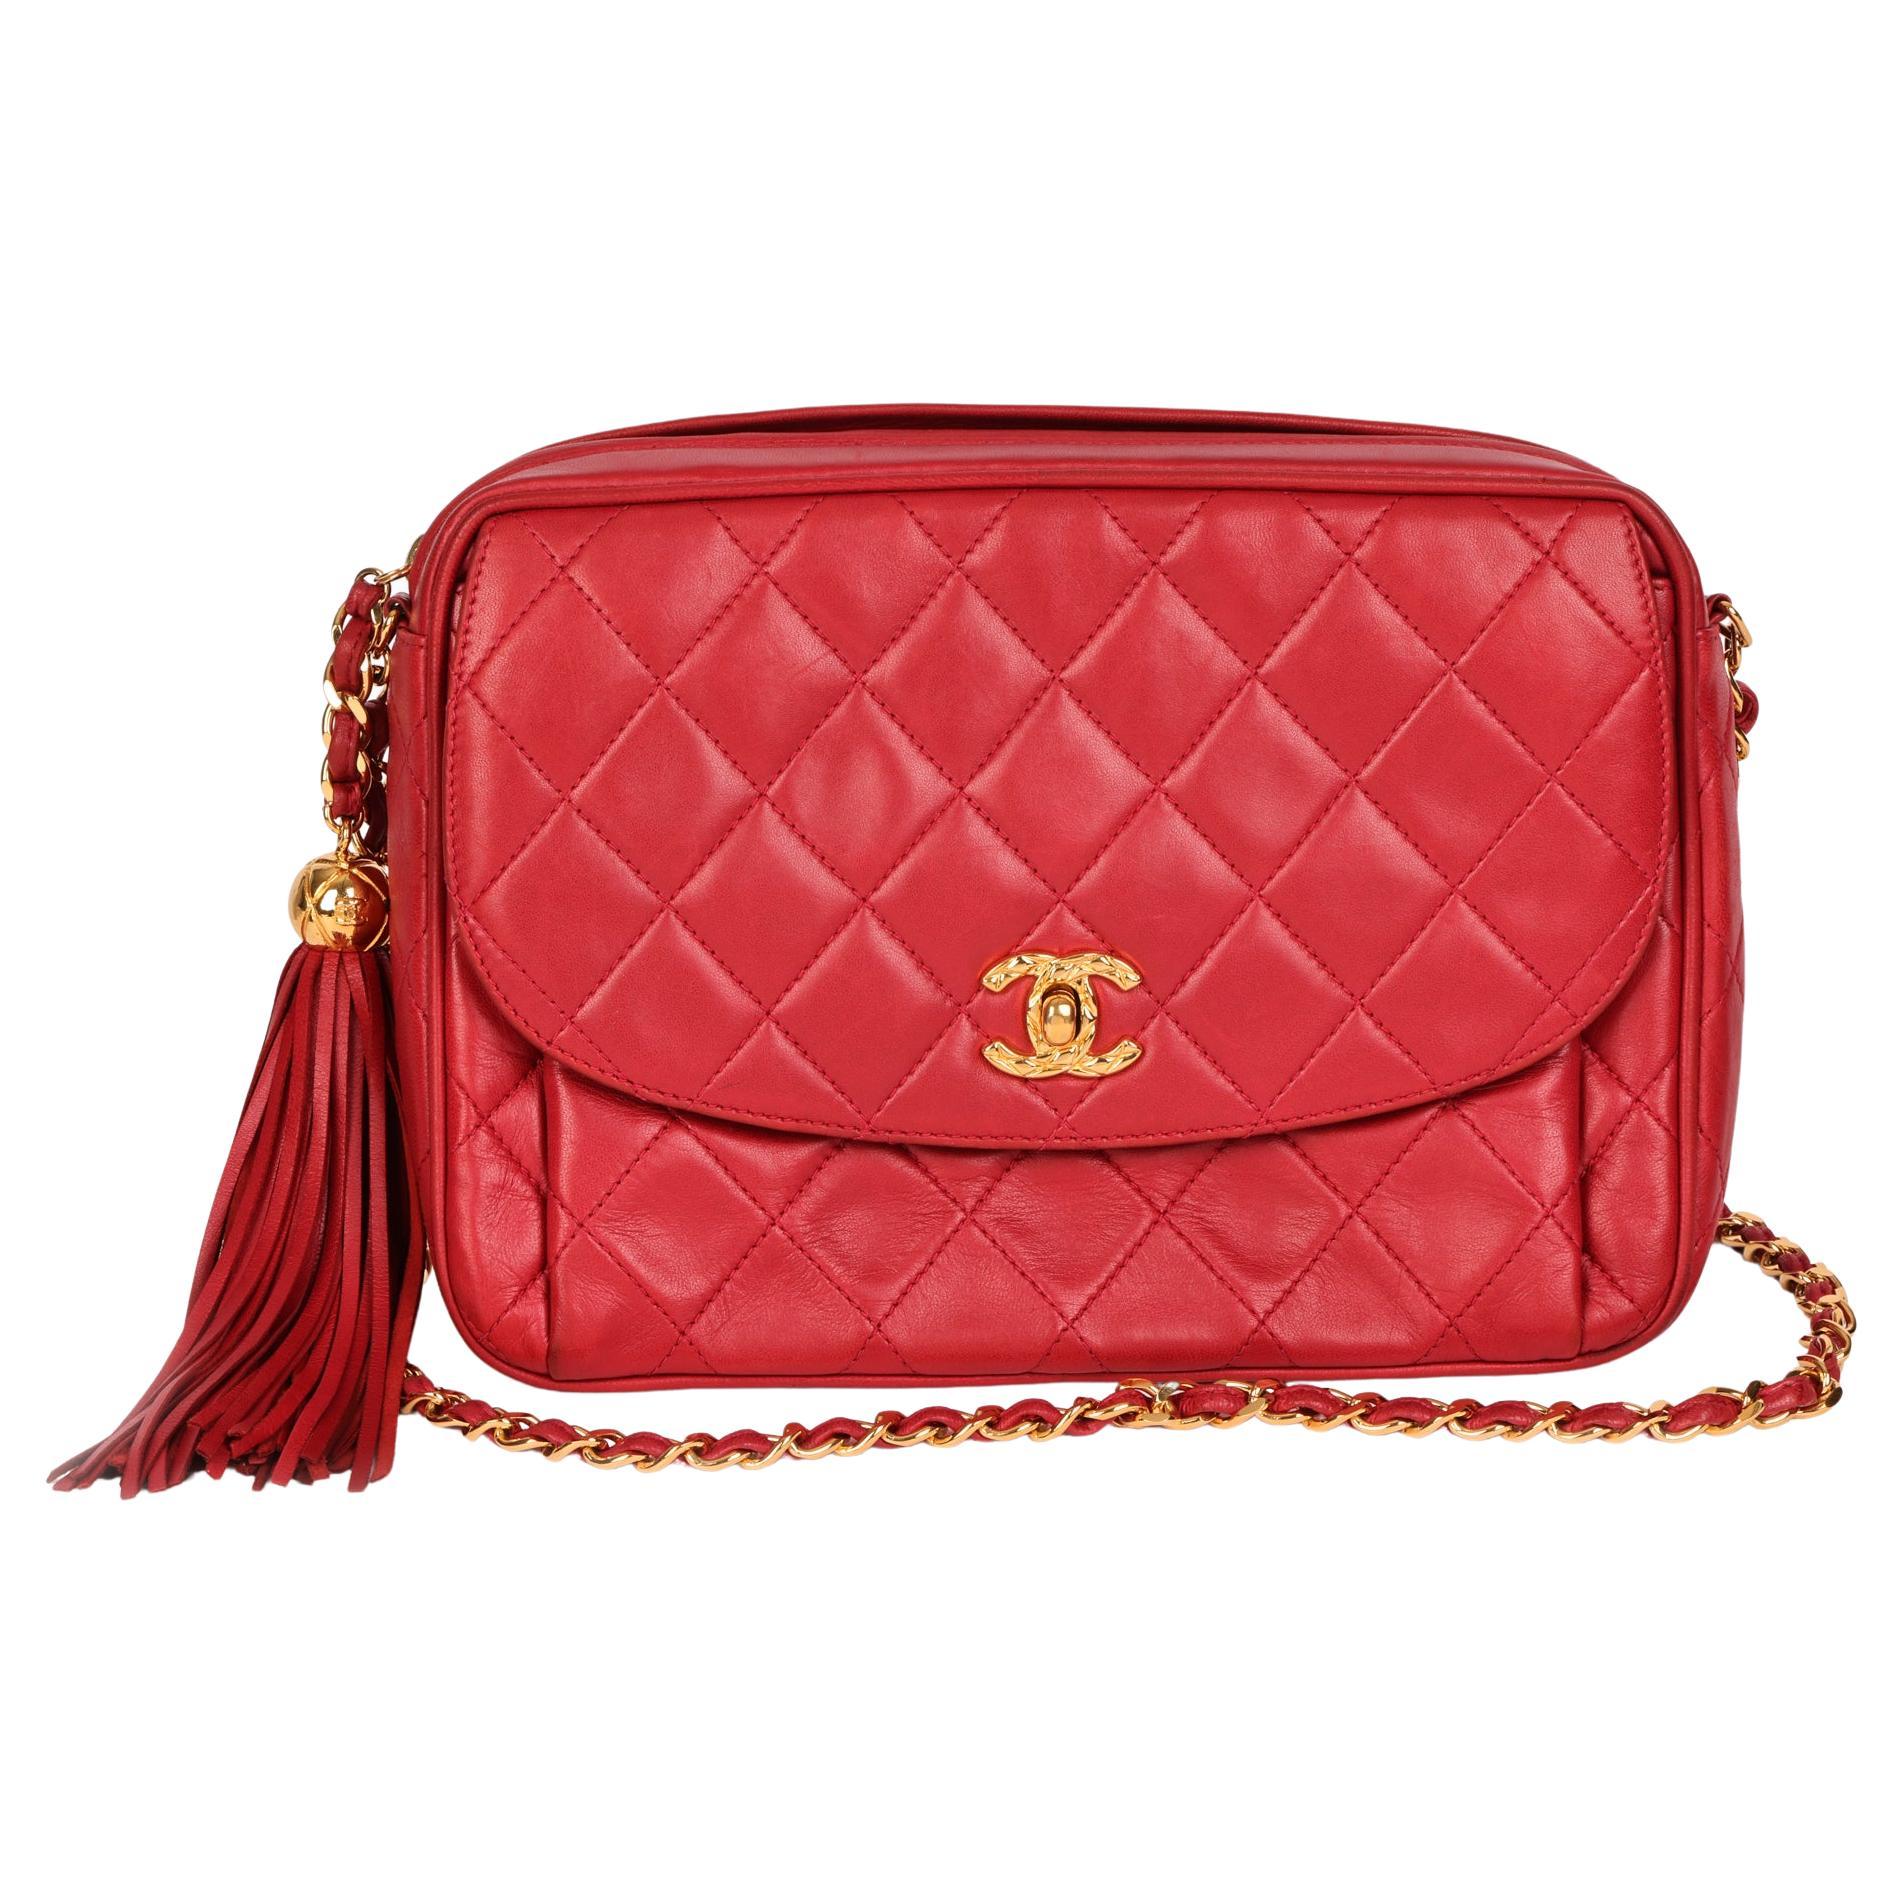 CHANEL Red Quilted Lambskin Vintage Small Classic Fringe